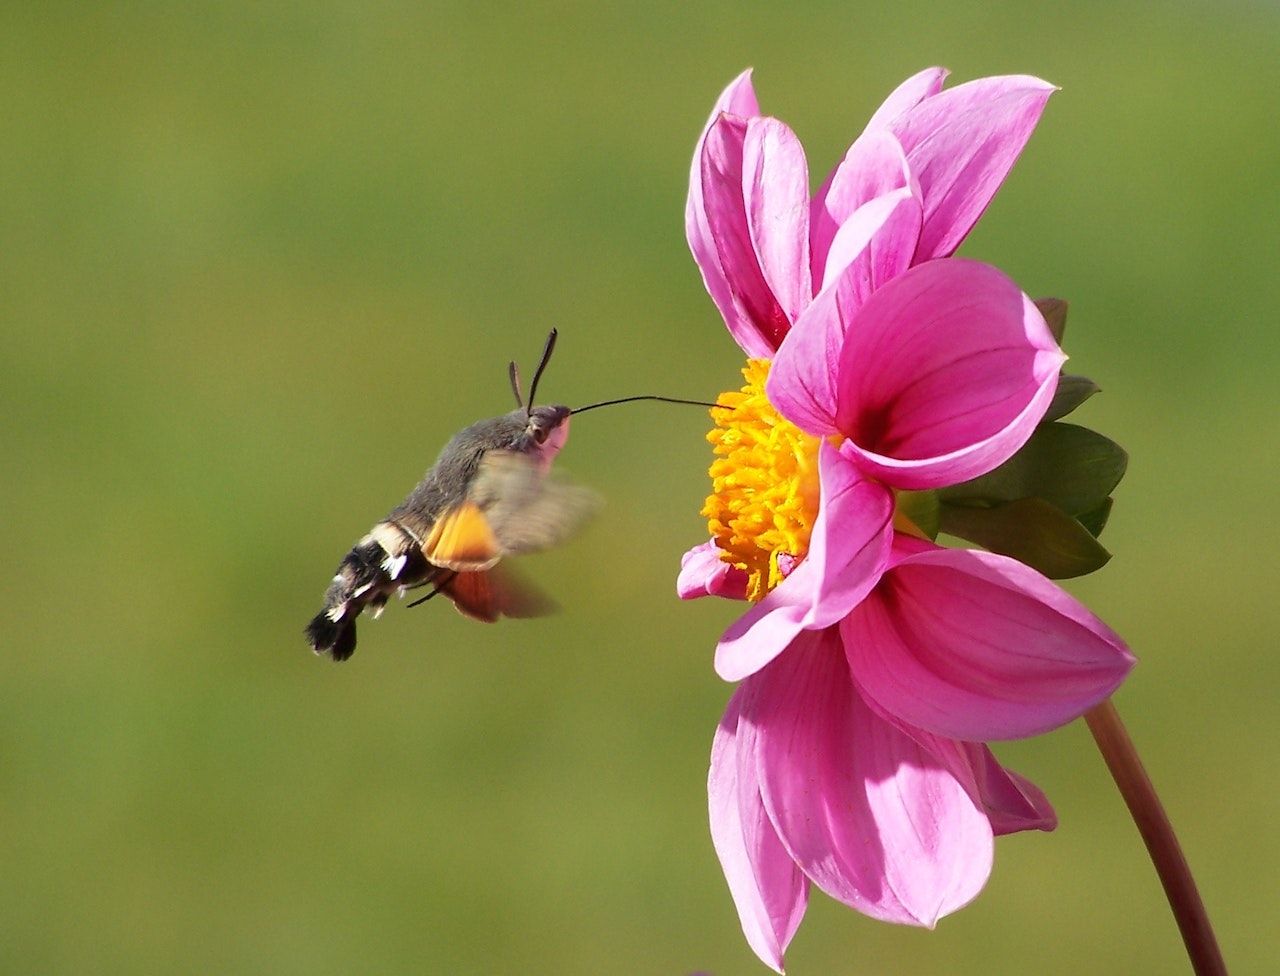 moth drinking nectar from a pink flower pollination natural pollinator